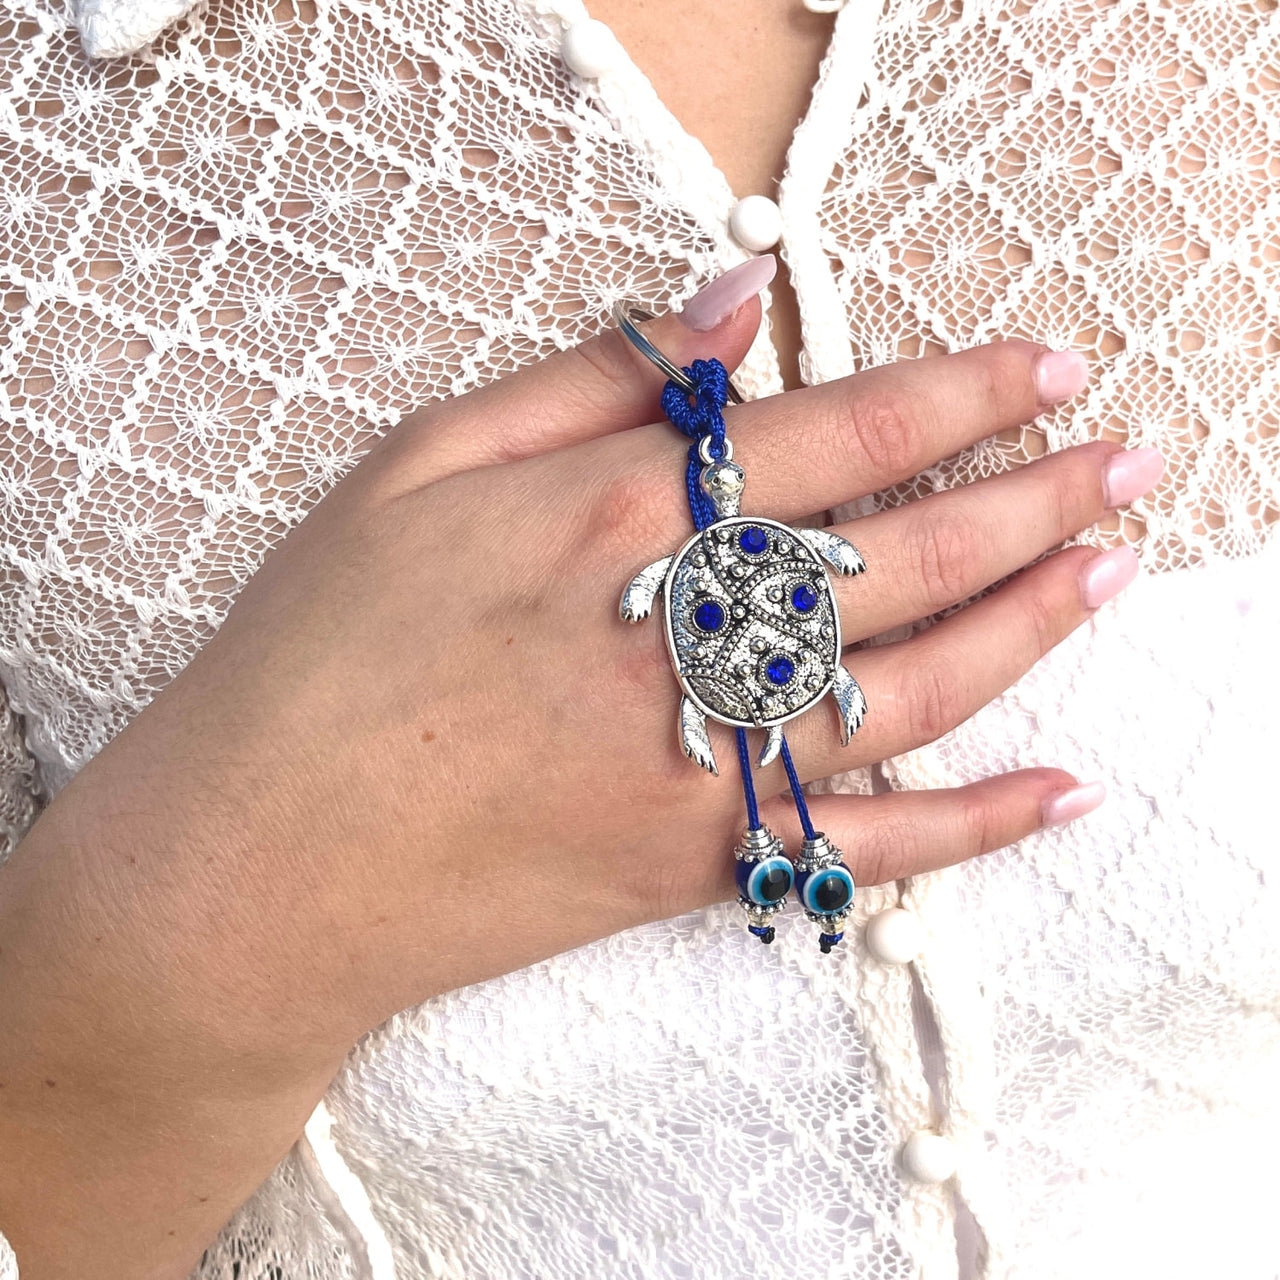 A woman wearing an evil eye bracelet with a blue bead and a silver turtle